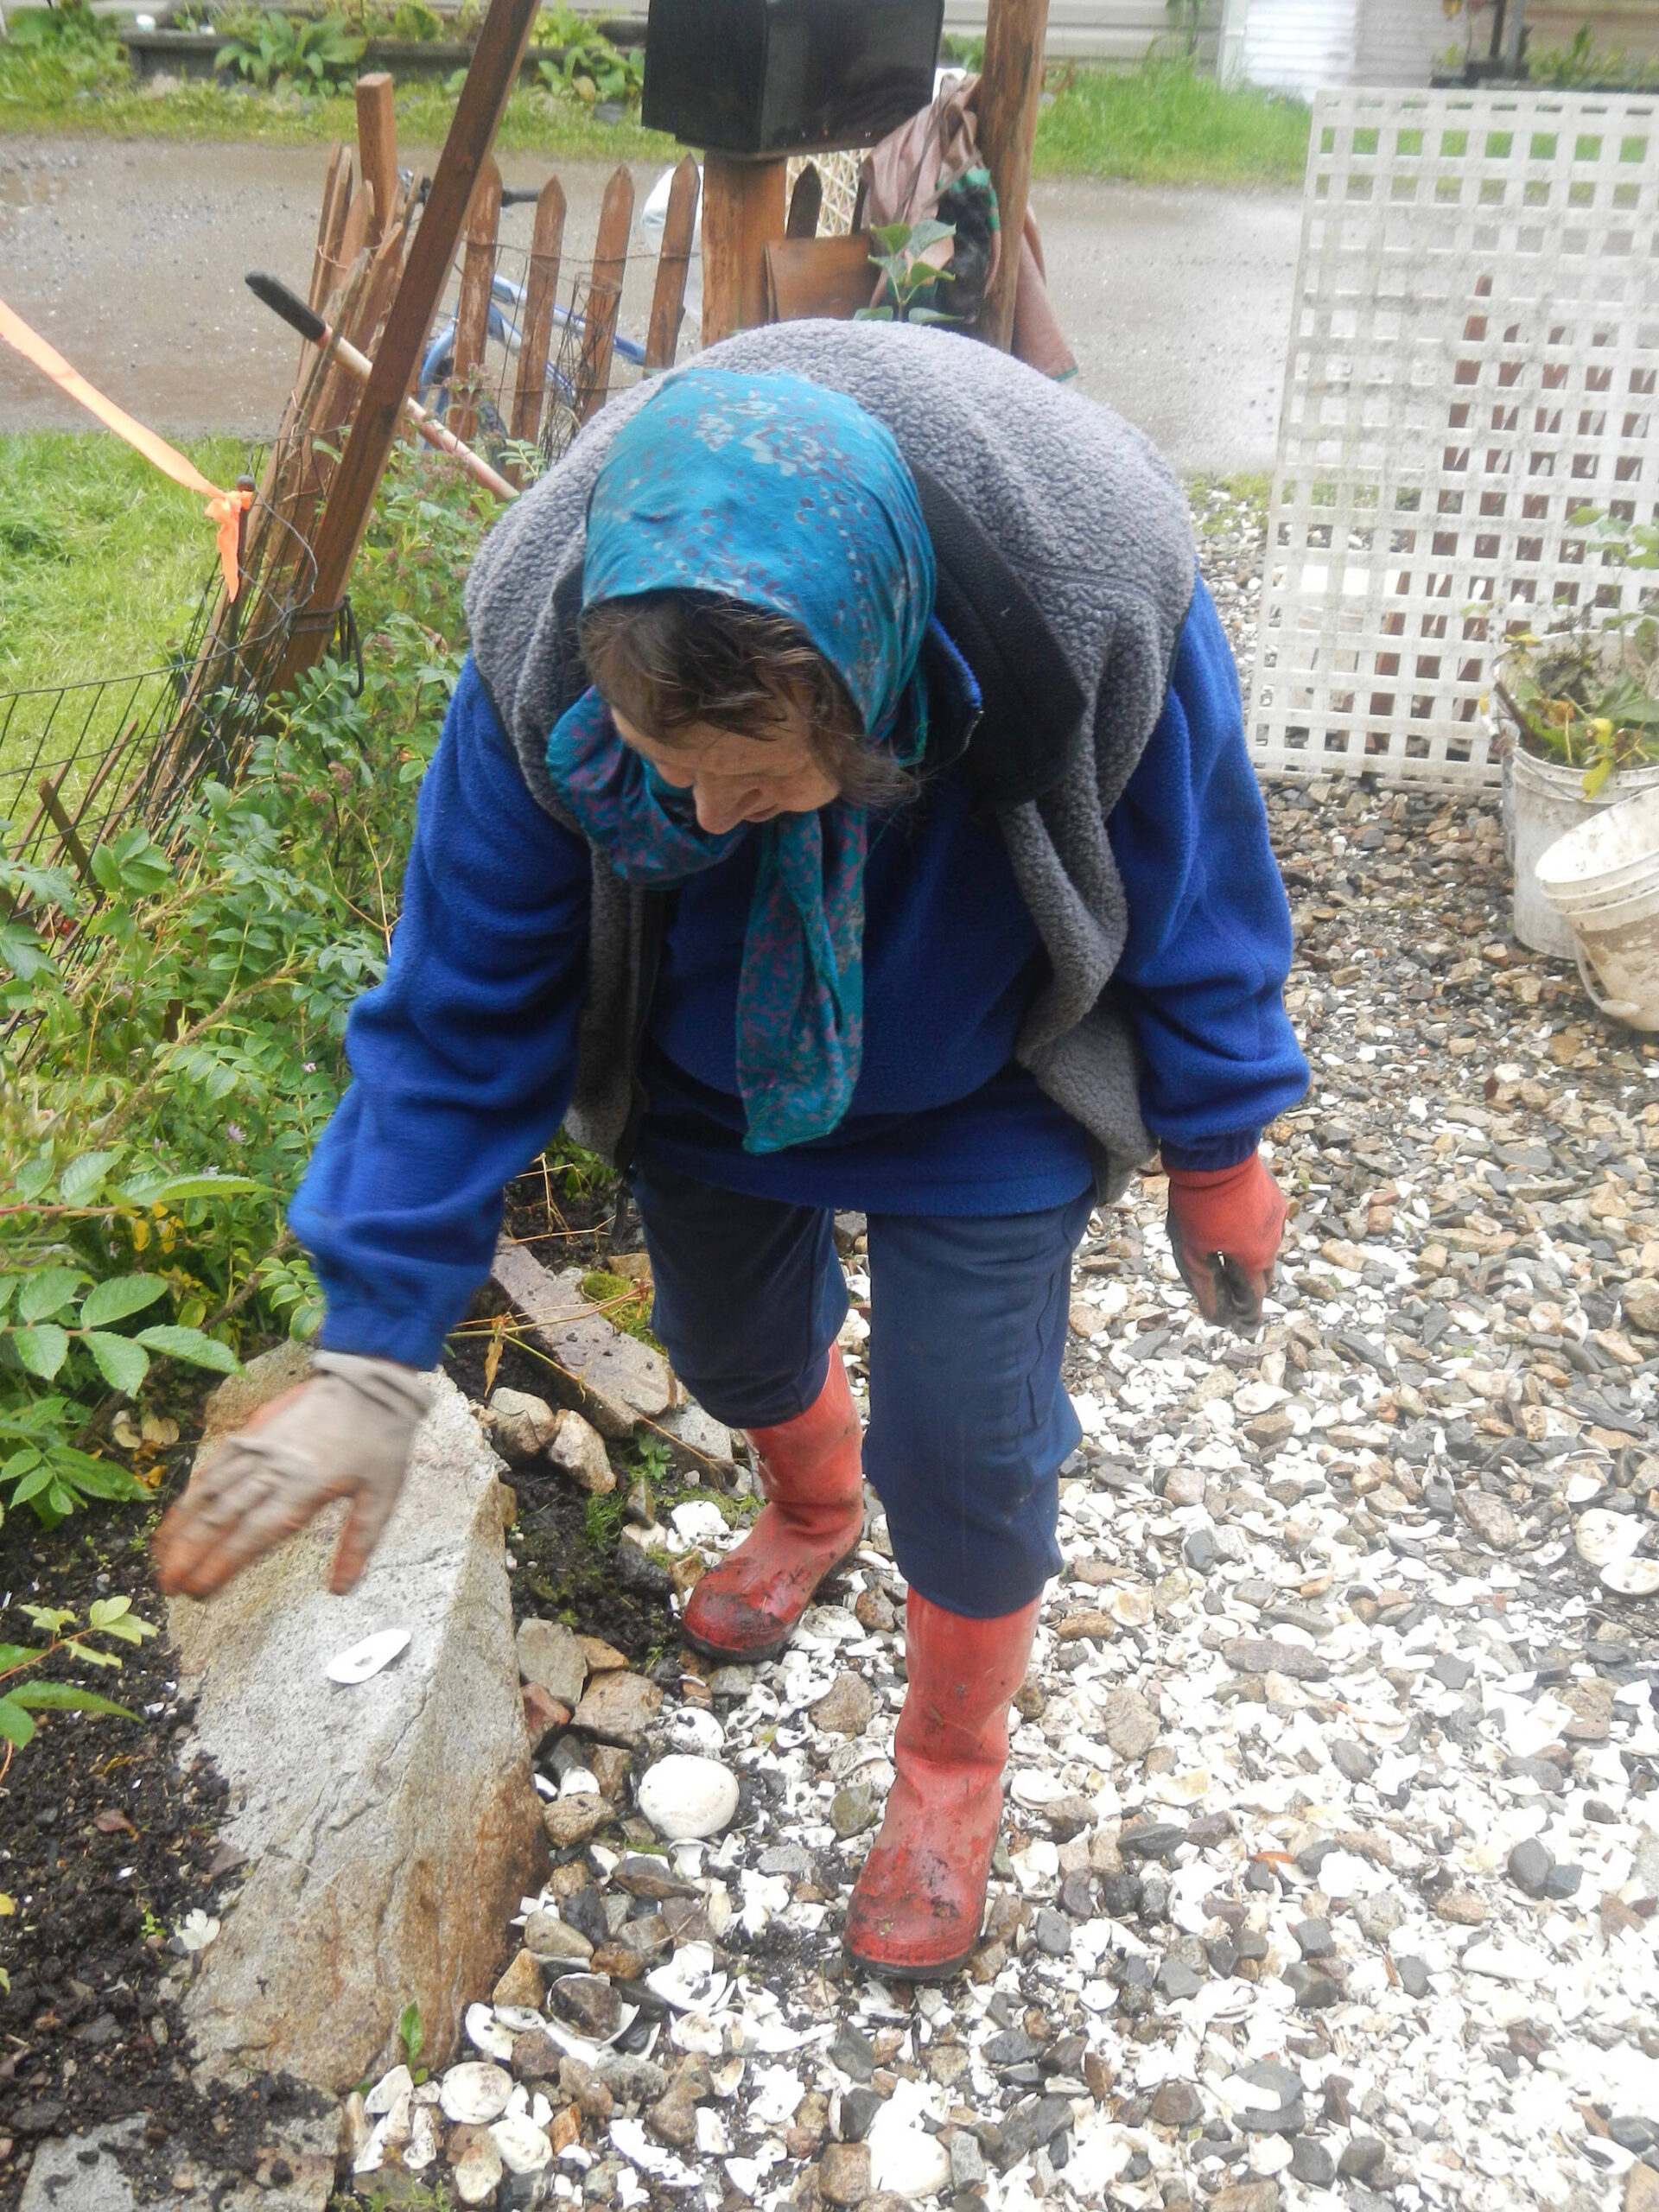 Tenakee resident Joni Gates fights slugs in her garden using broken-up clam shells that the slugs are unable to motor through. (Photo by Dimitra Lavrakas)